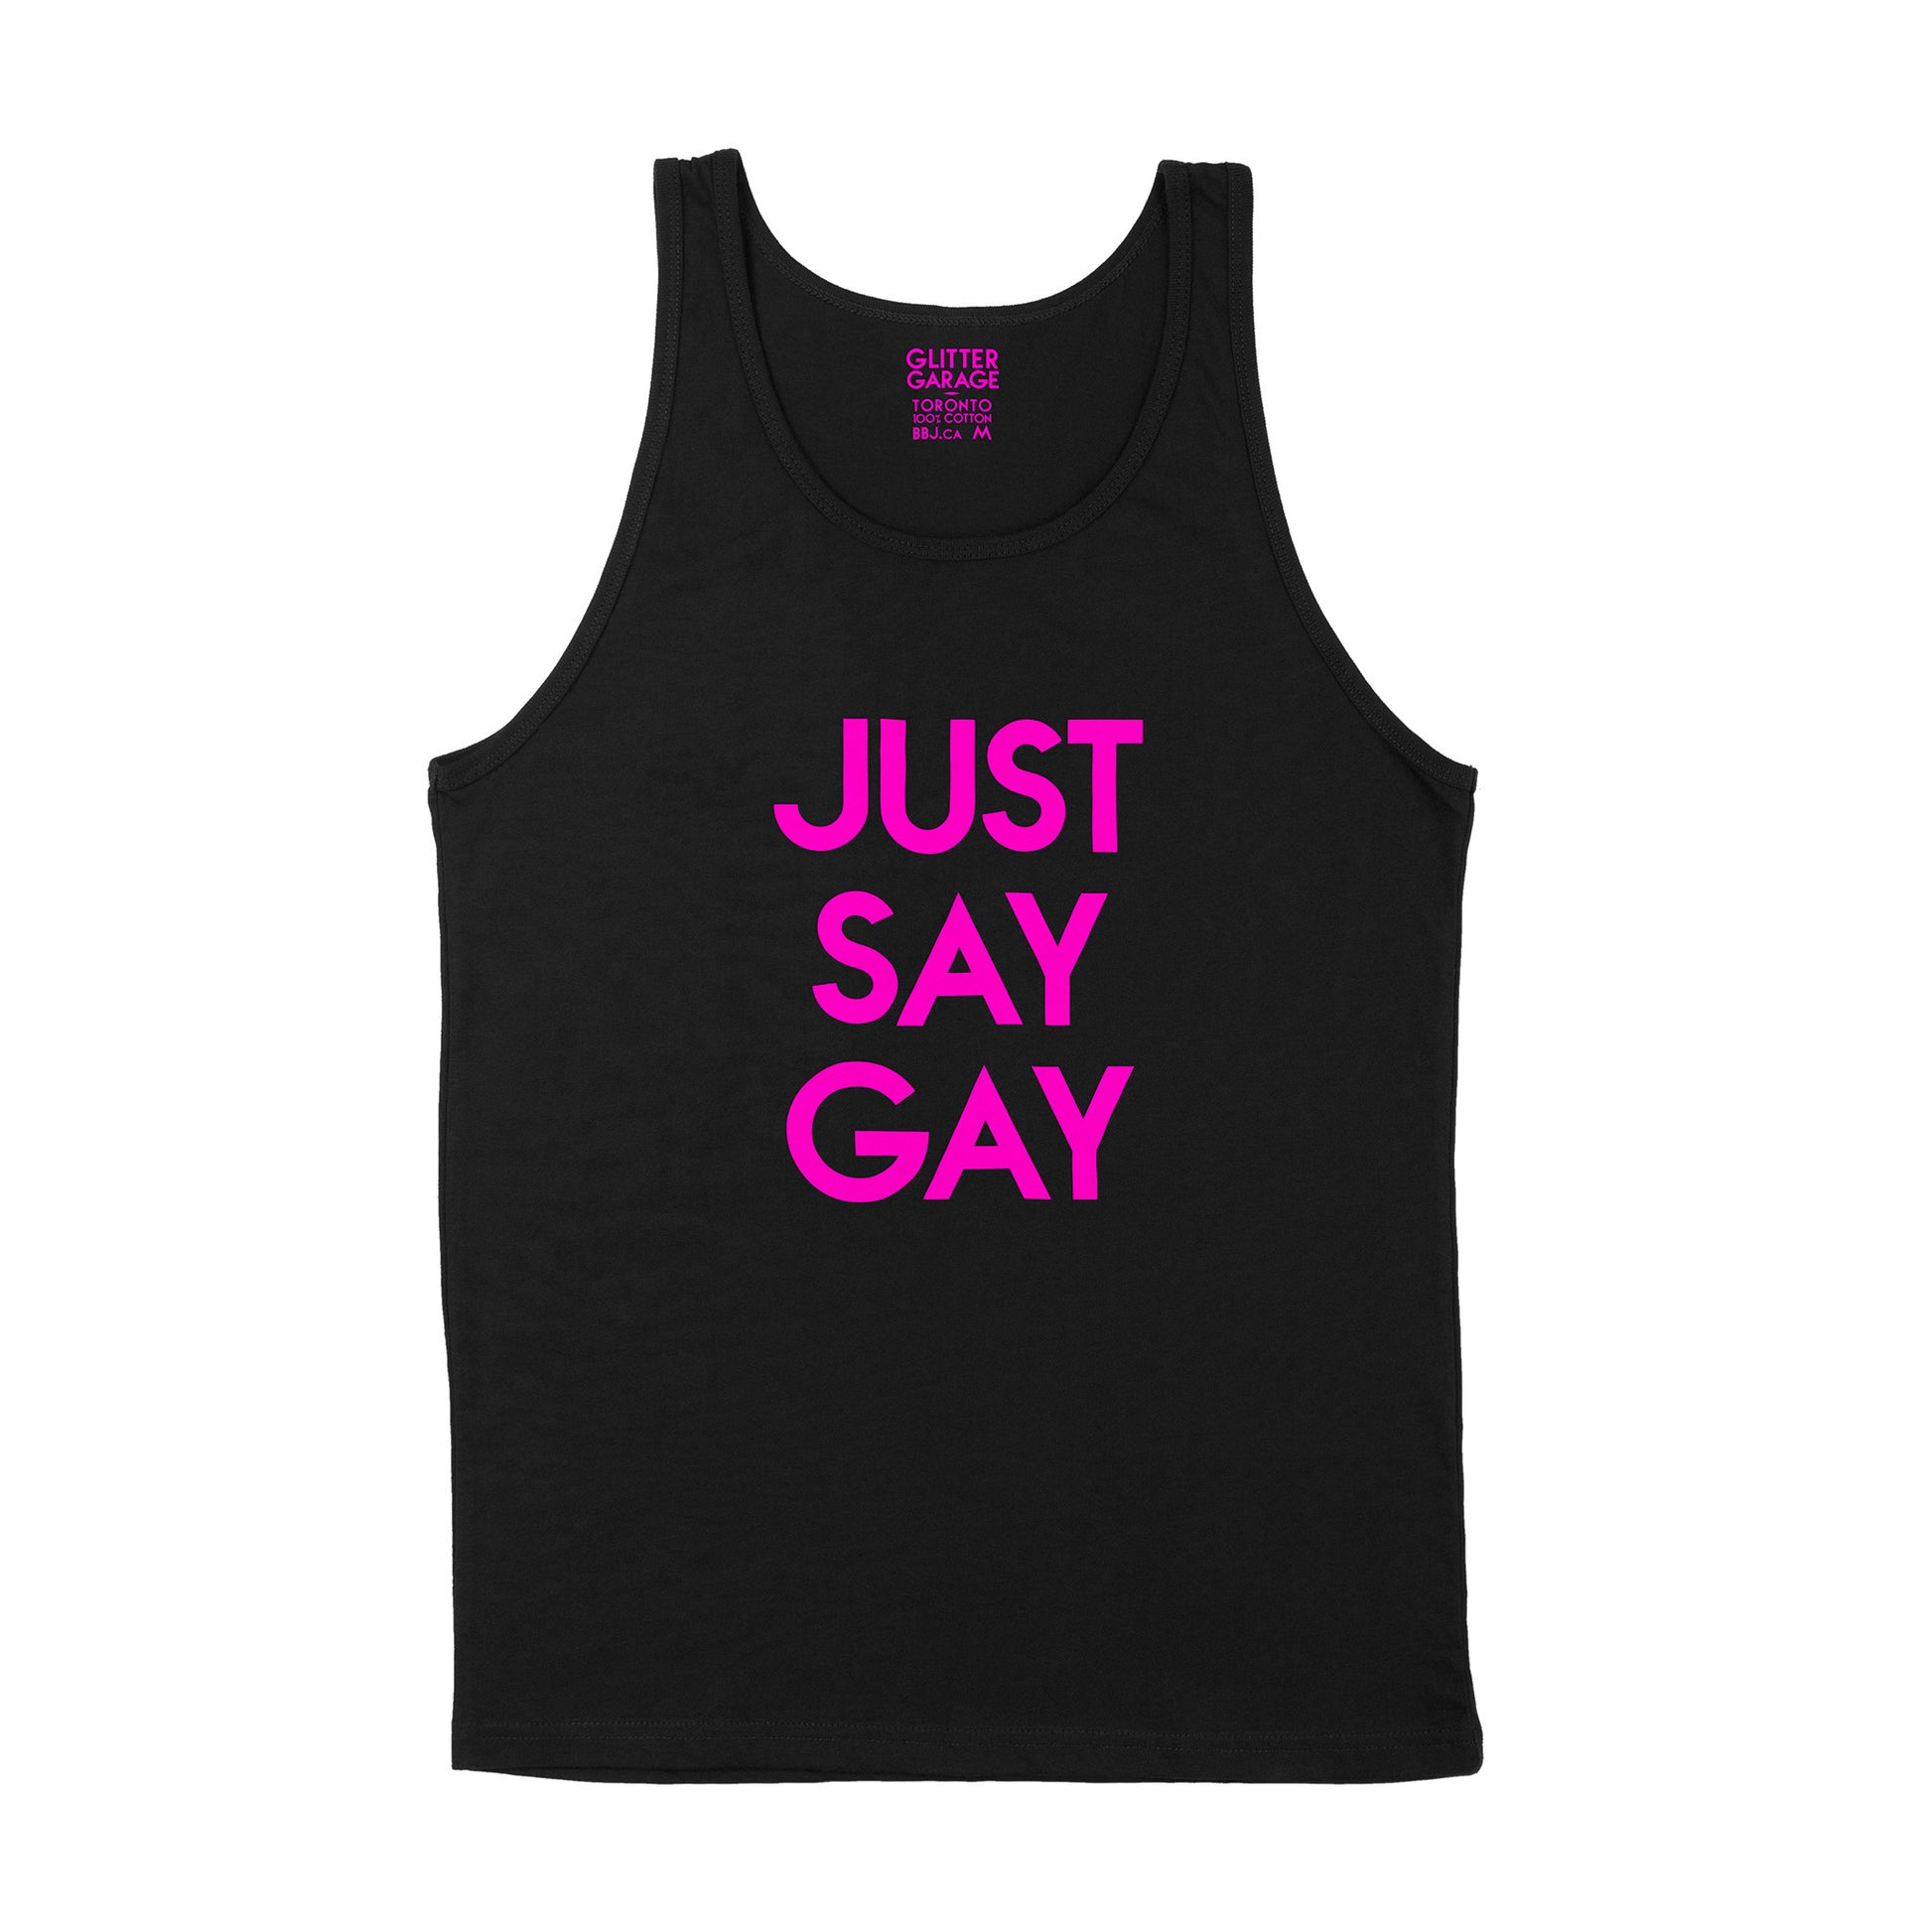 Custom text tank sample - Just Say Gay - neon pink matte text  - USE YOUR WORDS black unisex tank shirt by BBJ / Glitter Garage